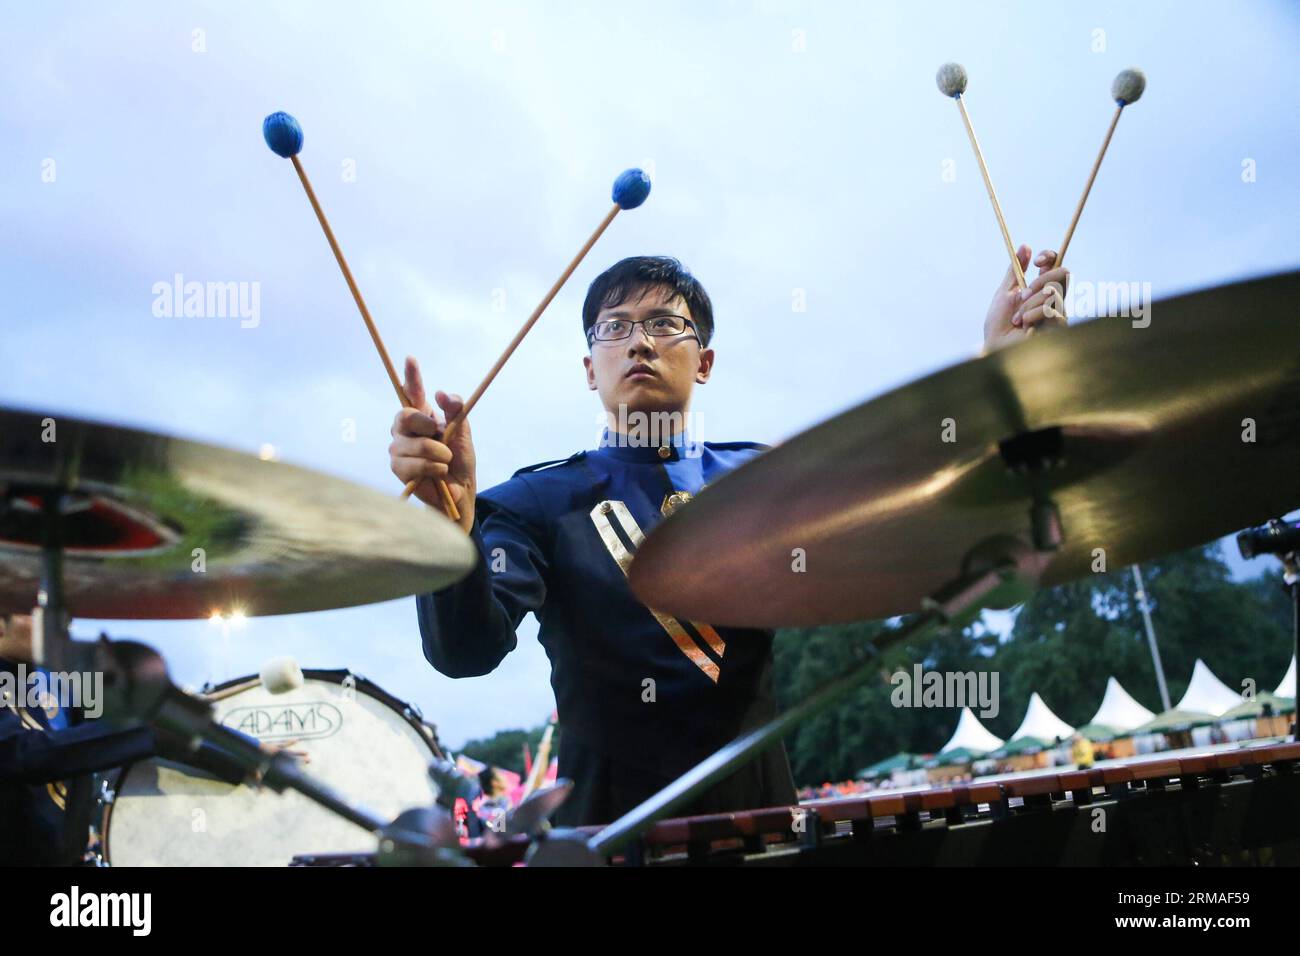 (140706) -- RASTEDE, July 5, 2014 (Xinhua) -- Gong Tianyao, member of Beihang University s marching band, performs during the 59th International Rasteder Music Day in Rastede, Germany, on July 5, 2014. More than 50 bands and thousands of musicians from 6 countries and regions took part in the three-day International Rasteder Music Day, one of the oldest music festivals in Germany. (Xinhua/Zhang Fan) GERMANY-RASTEDE-MUSIC DAY-CHINESE MARCHING BAND PUBLICATIONxNOTxINxCHN   Rastede July 5 2014 XINHUA Gong  member of  University S Marching Tie performs during The 59th International  Music Day in R Stock Photo